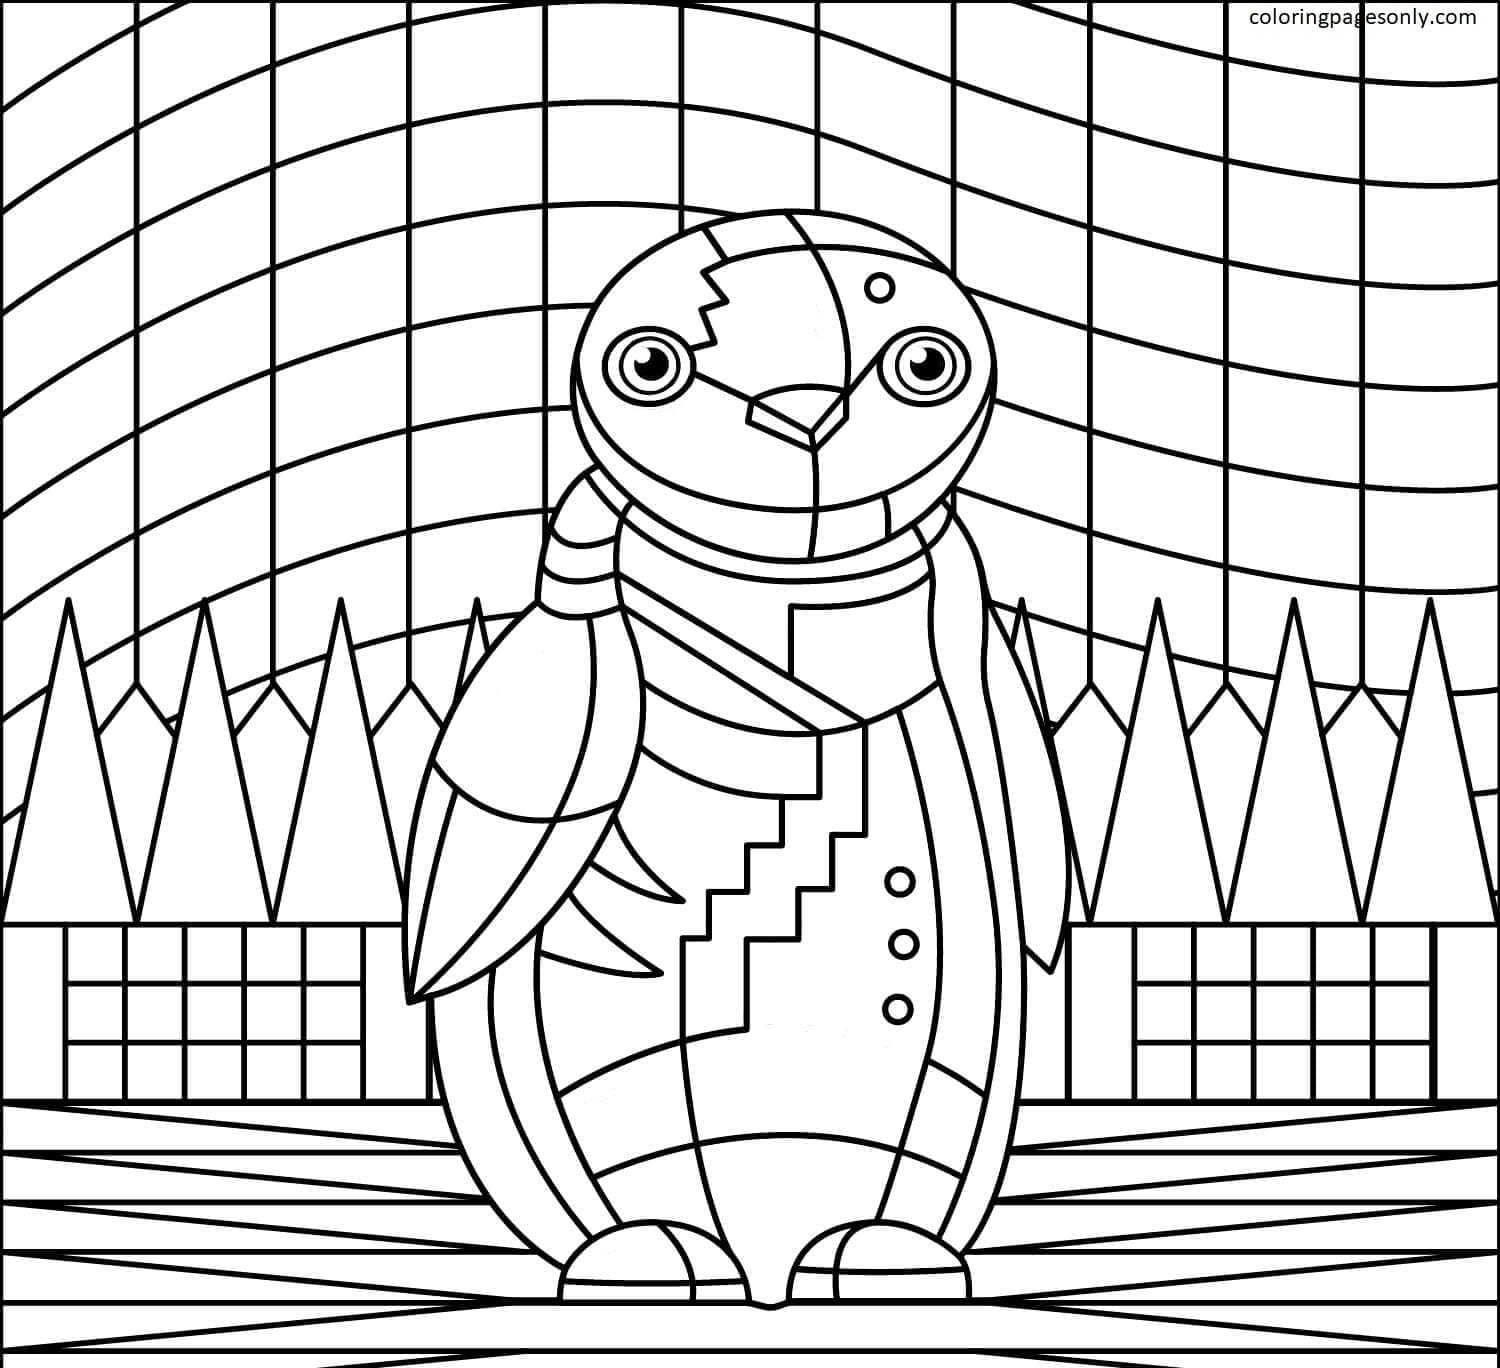 Penguin Coloring Pages